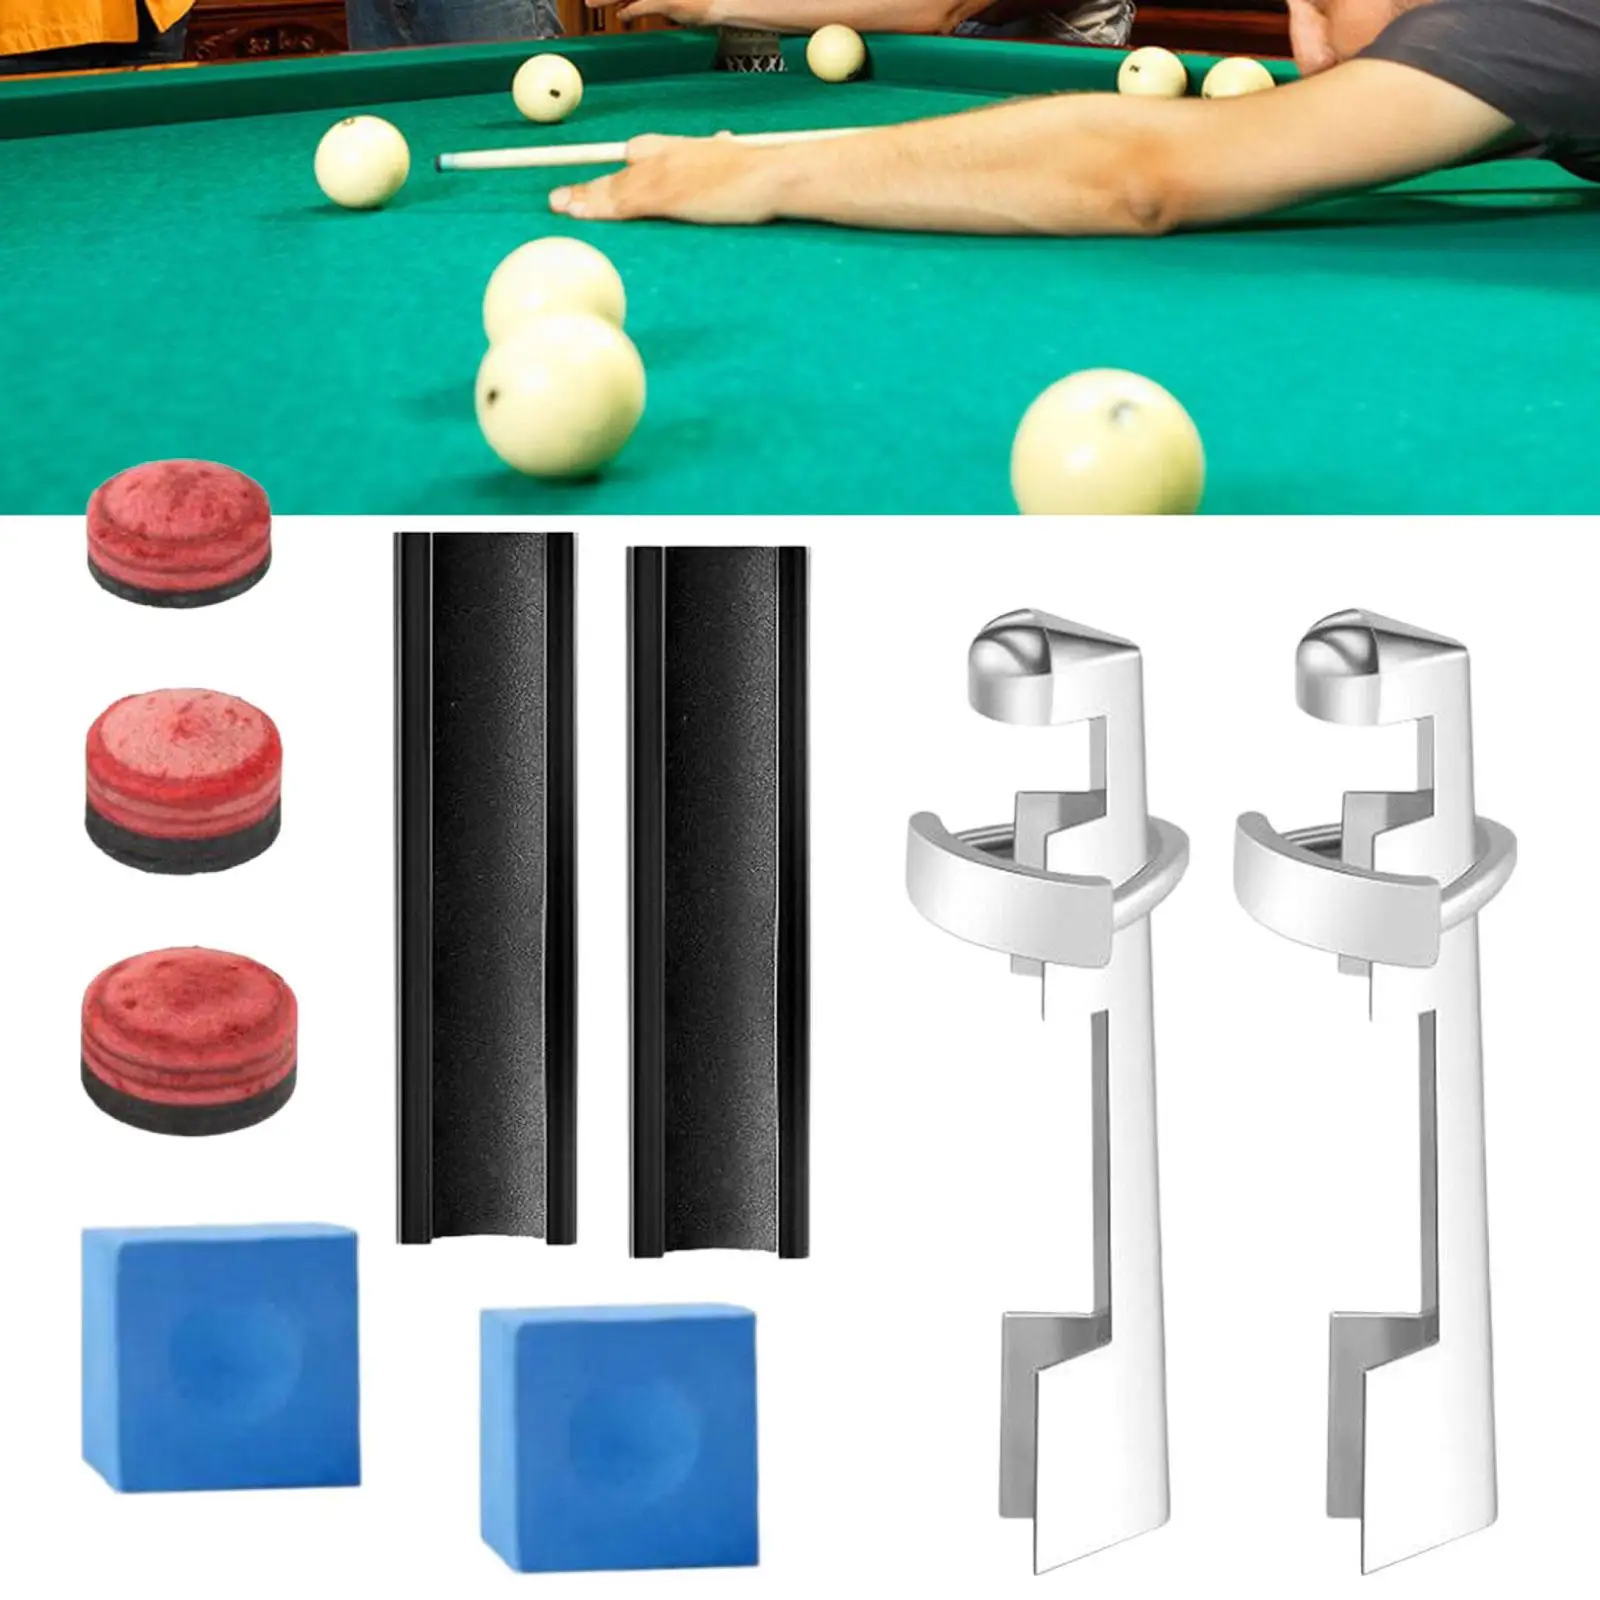 9x Billiards Cue Stick Billiards Pool Tip Trimmer Pool Cue Tip Repair Kit for Enthusiasts Billiards Playing Game Outdoor Sports